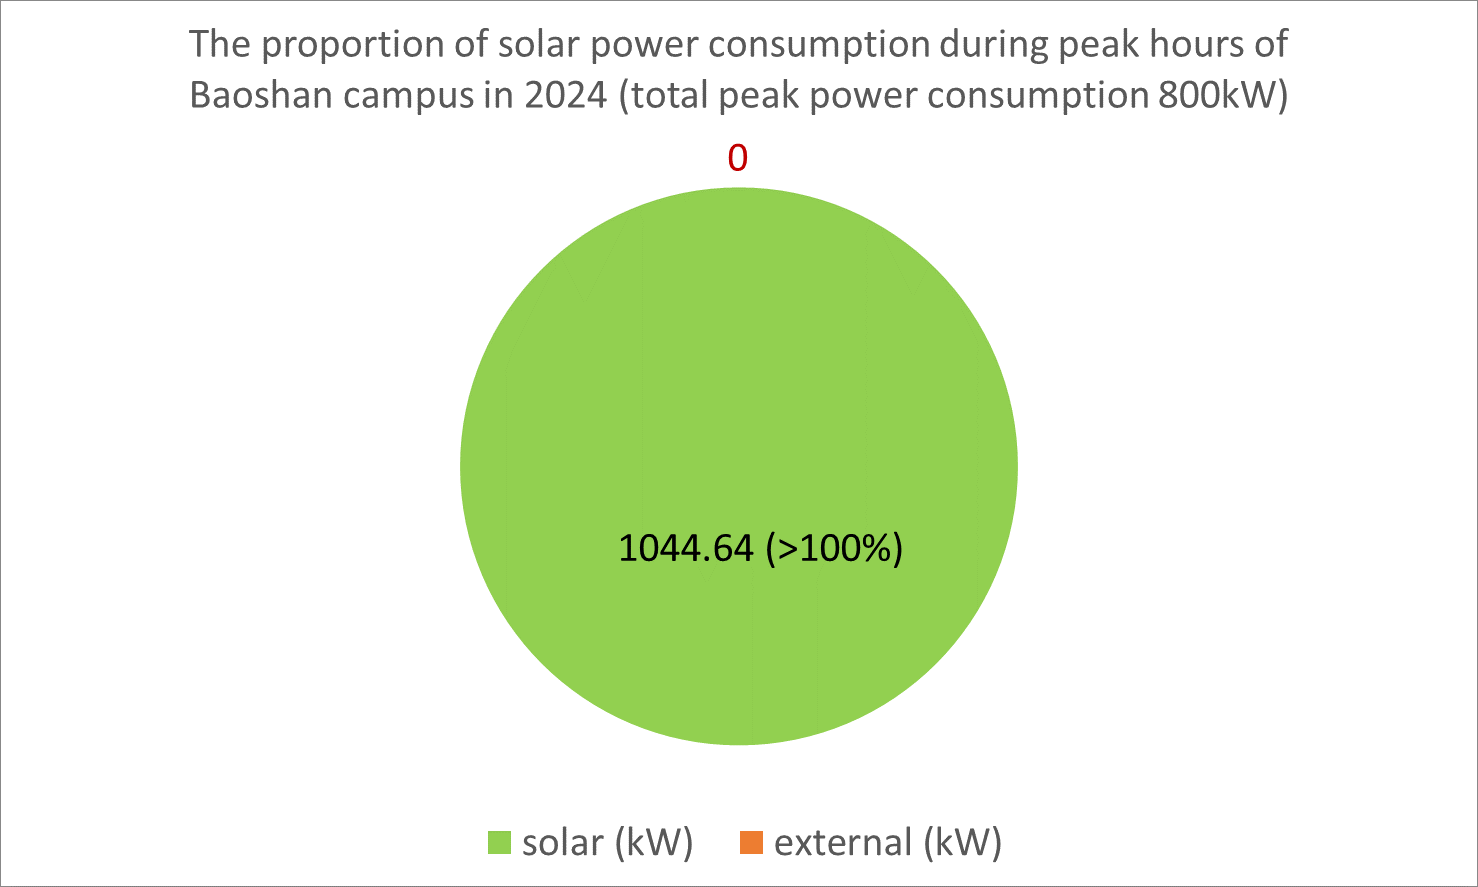 Figure 7. The proportion of solar power consumption during peak hours of the Baoshan campus in 2024